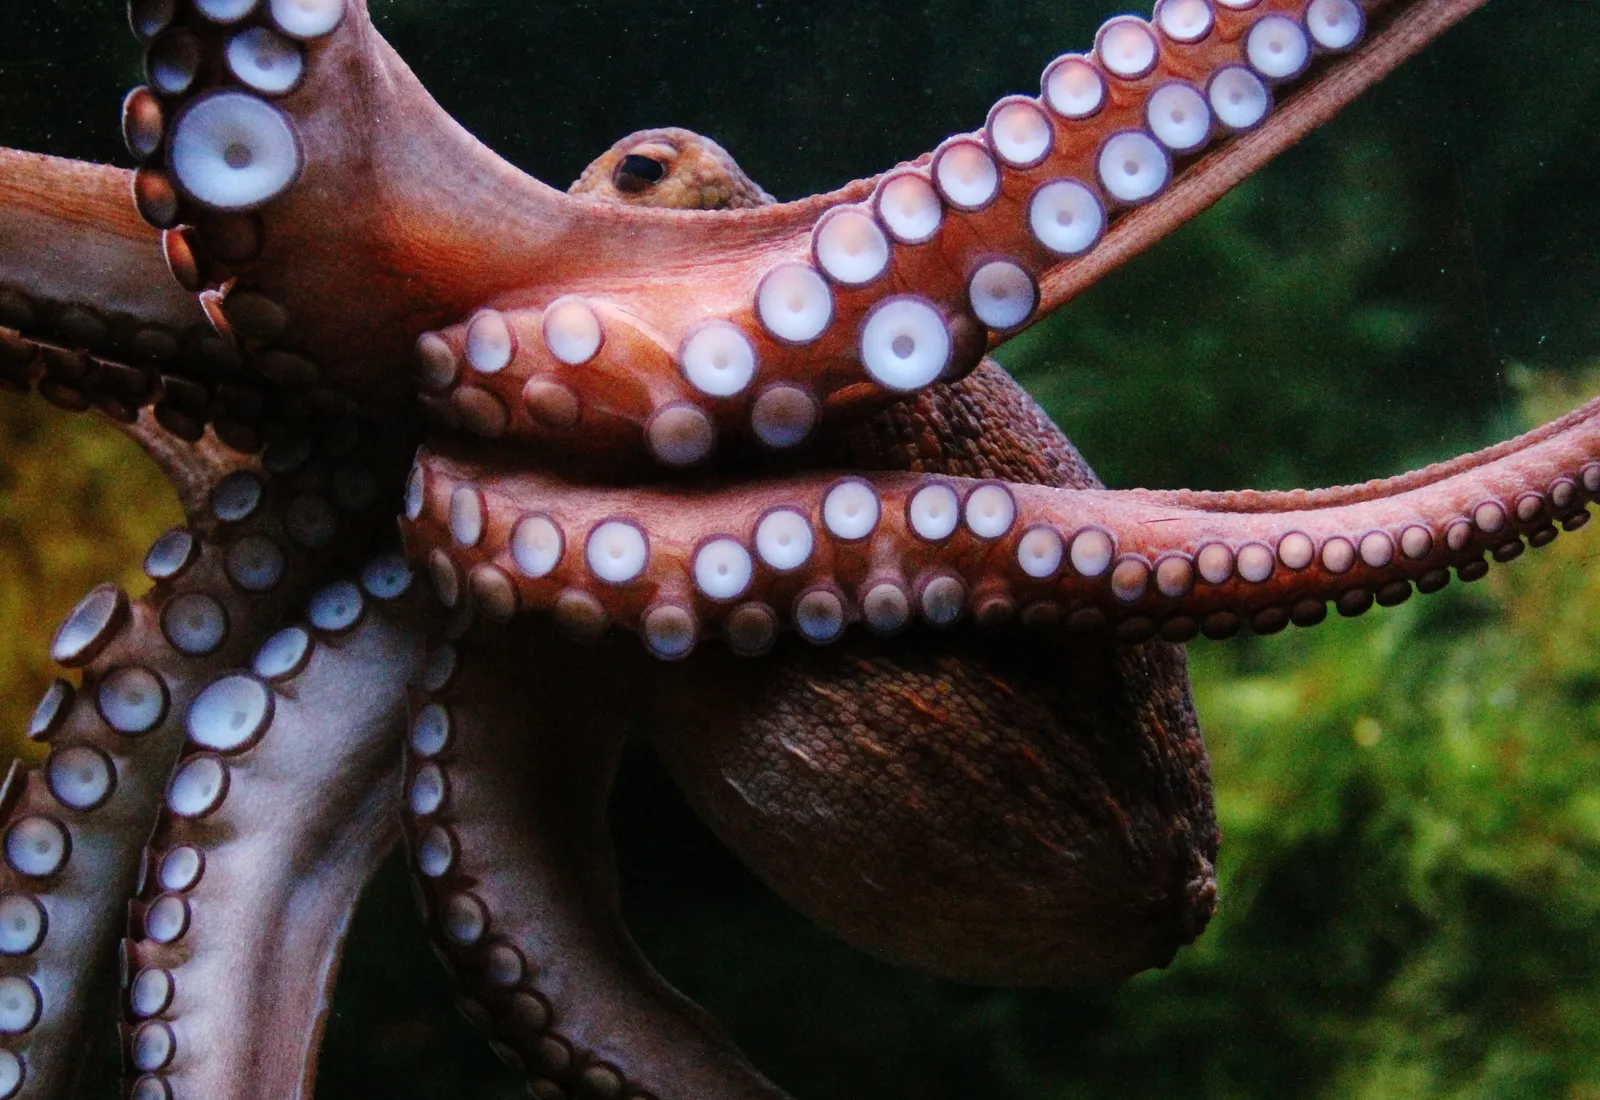 Watch: This beautiful octopus was cut out of a single piece of paper